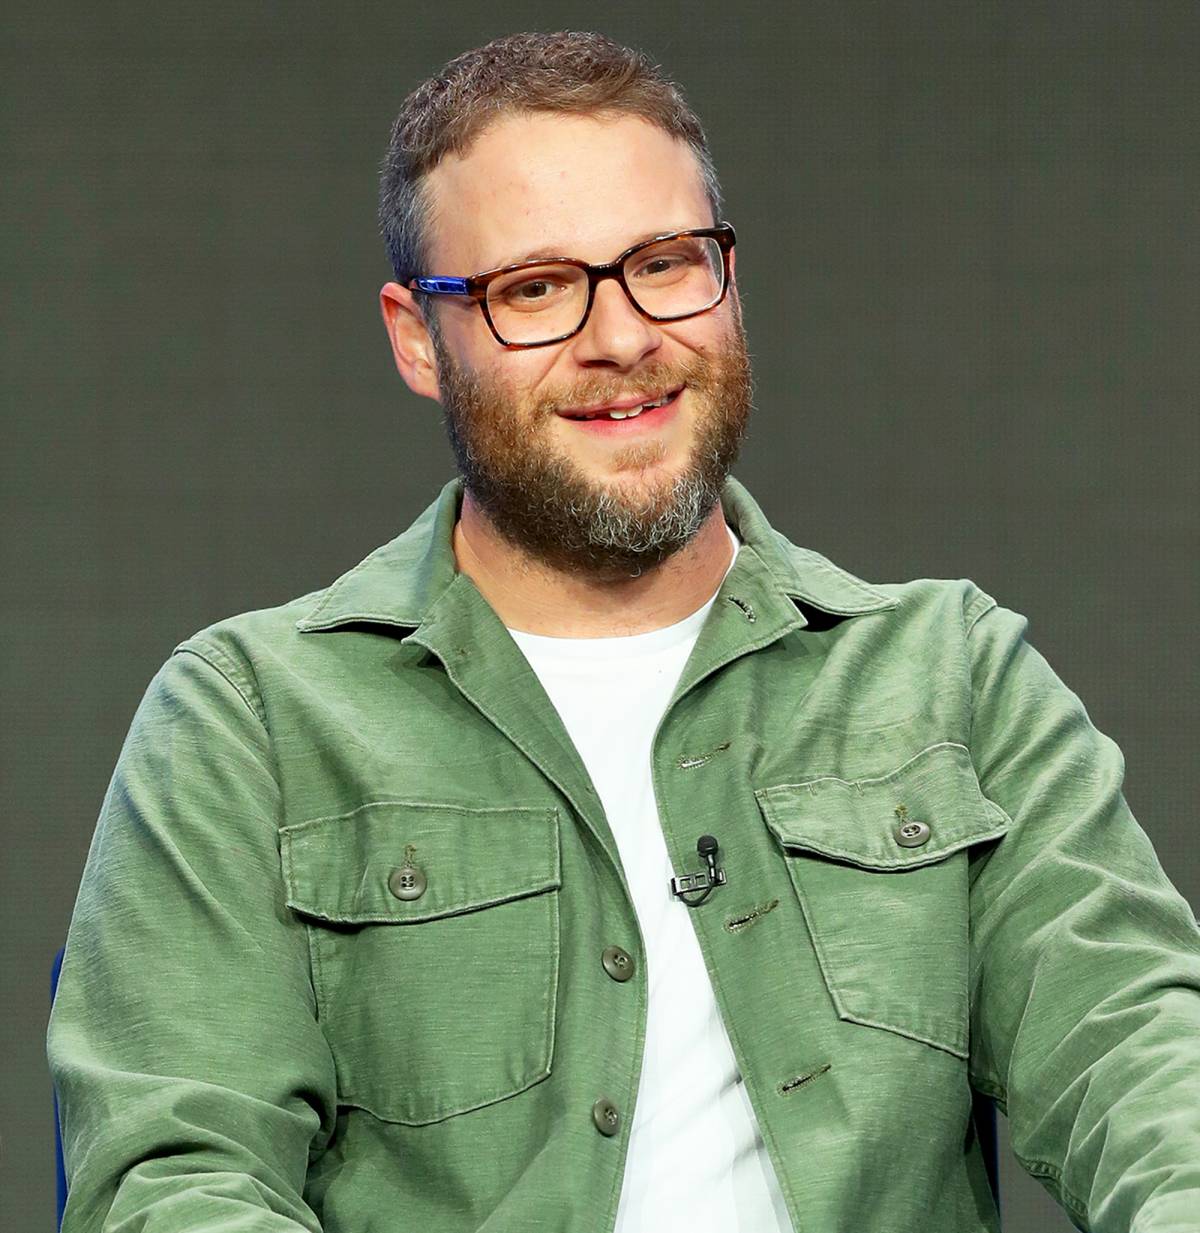 Seth Rogen’s Mom Used Twitter to Find Him | Us Weekly